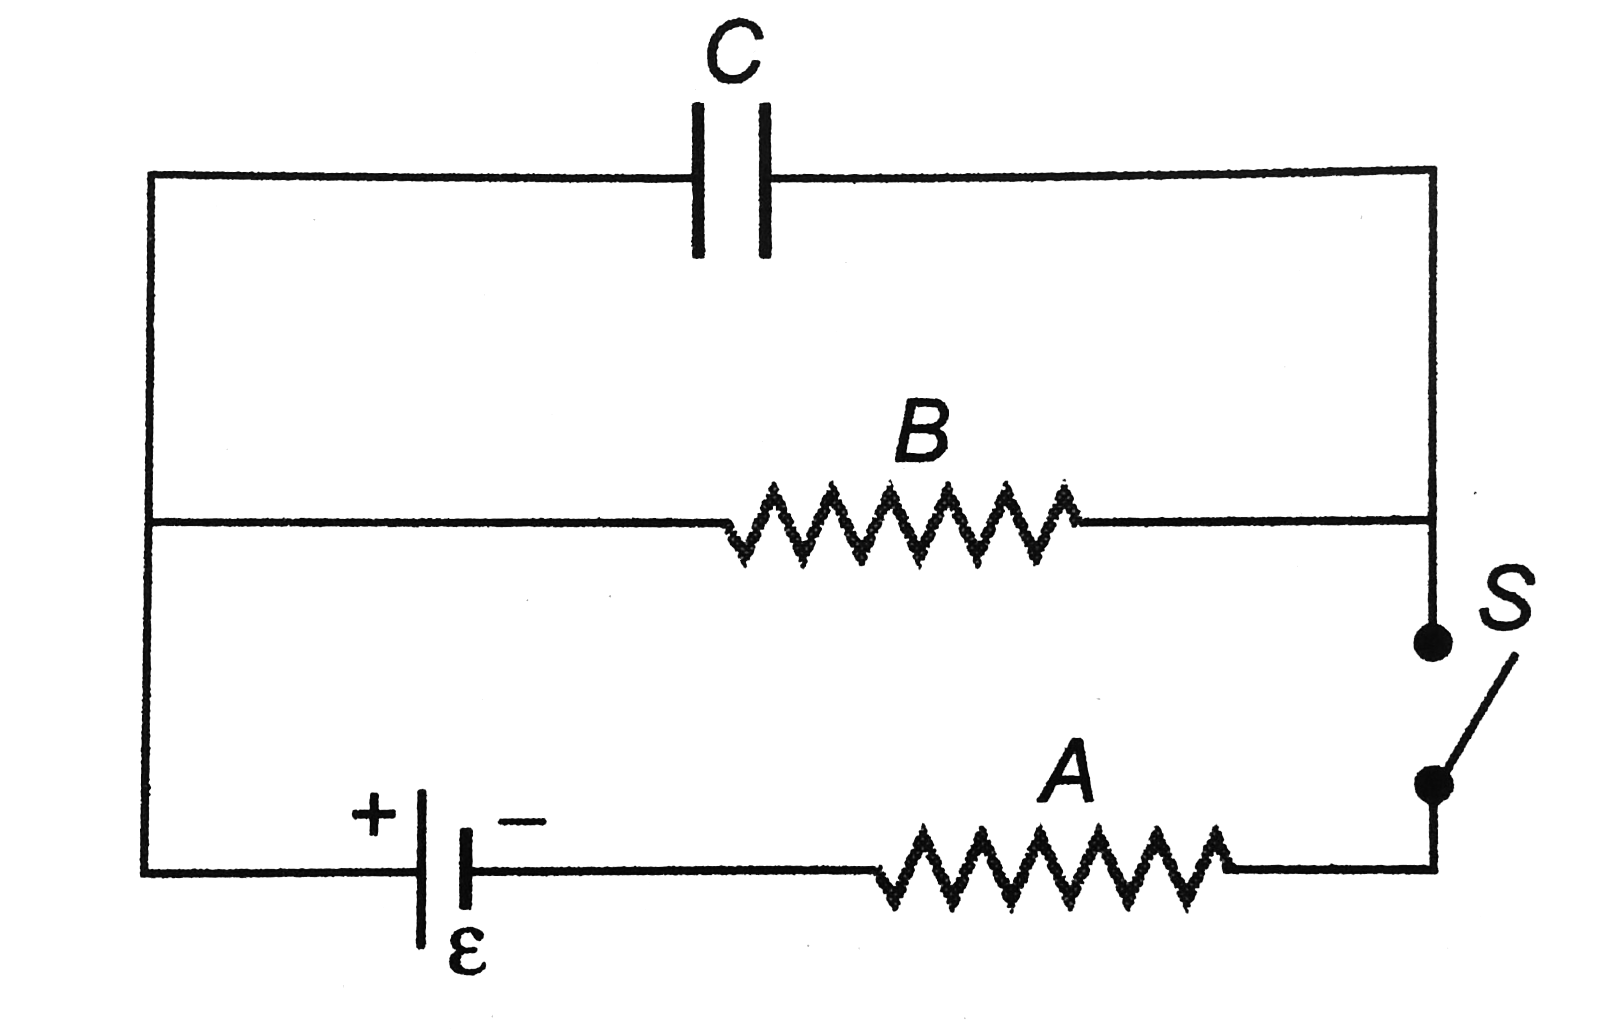 In the circuit shown, A and B are equal resistances. When S is closed, the capcitor Ccharges from the cell of emf epsilon and reaches a steady state.